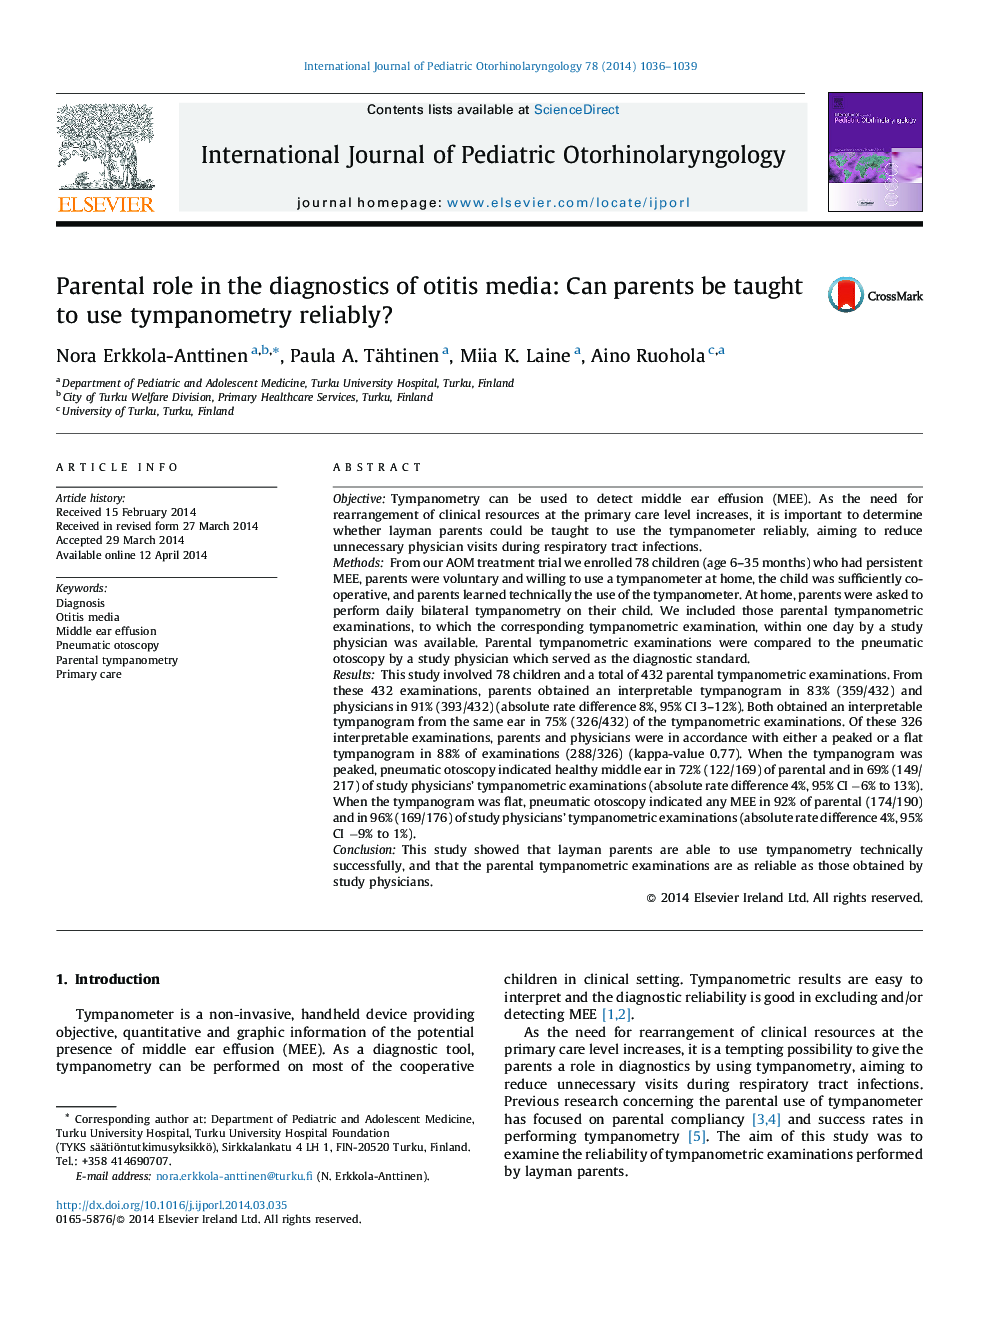 Parental role in the diagnostics of otitis media: Can parents be taught to use tympanometry reliably?